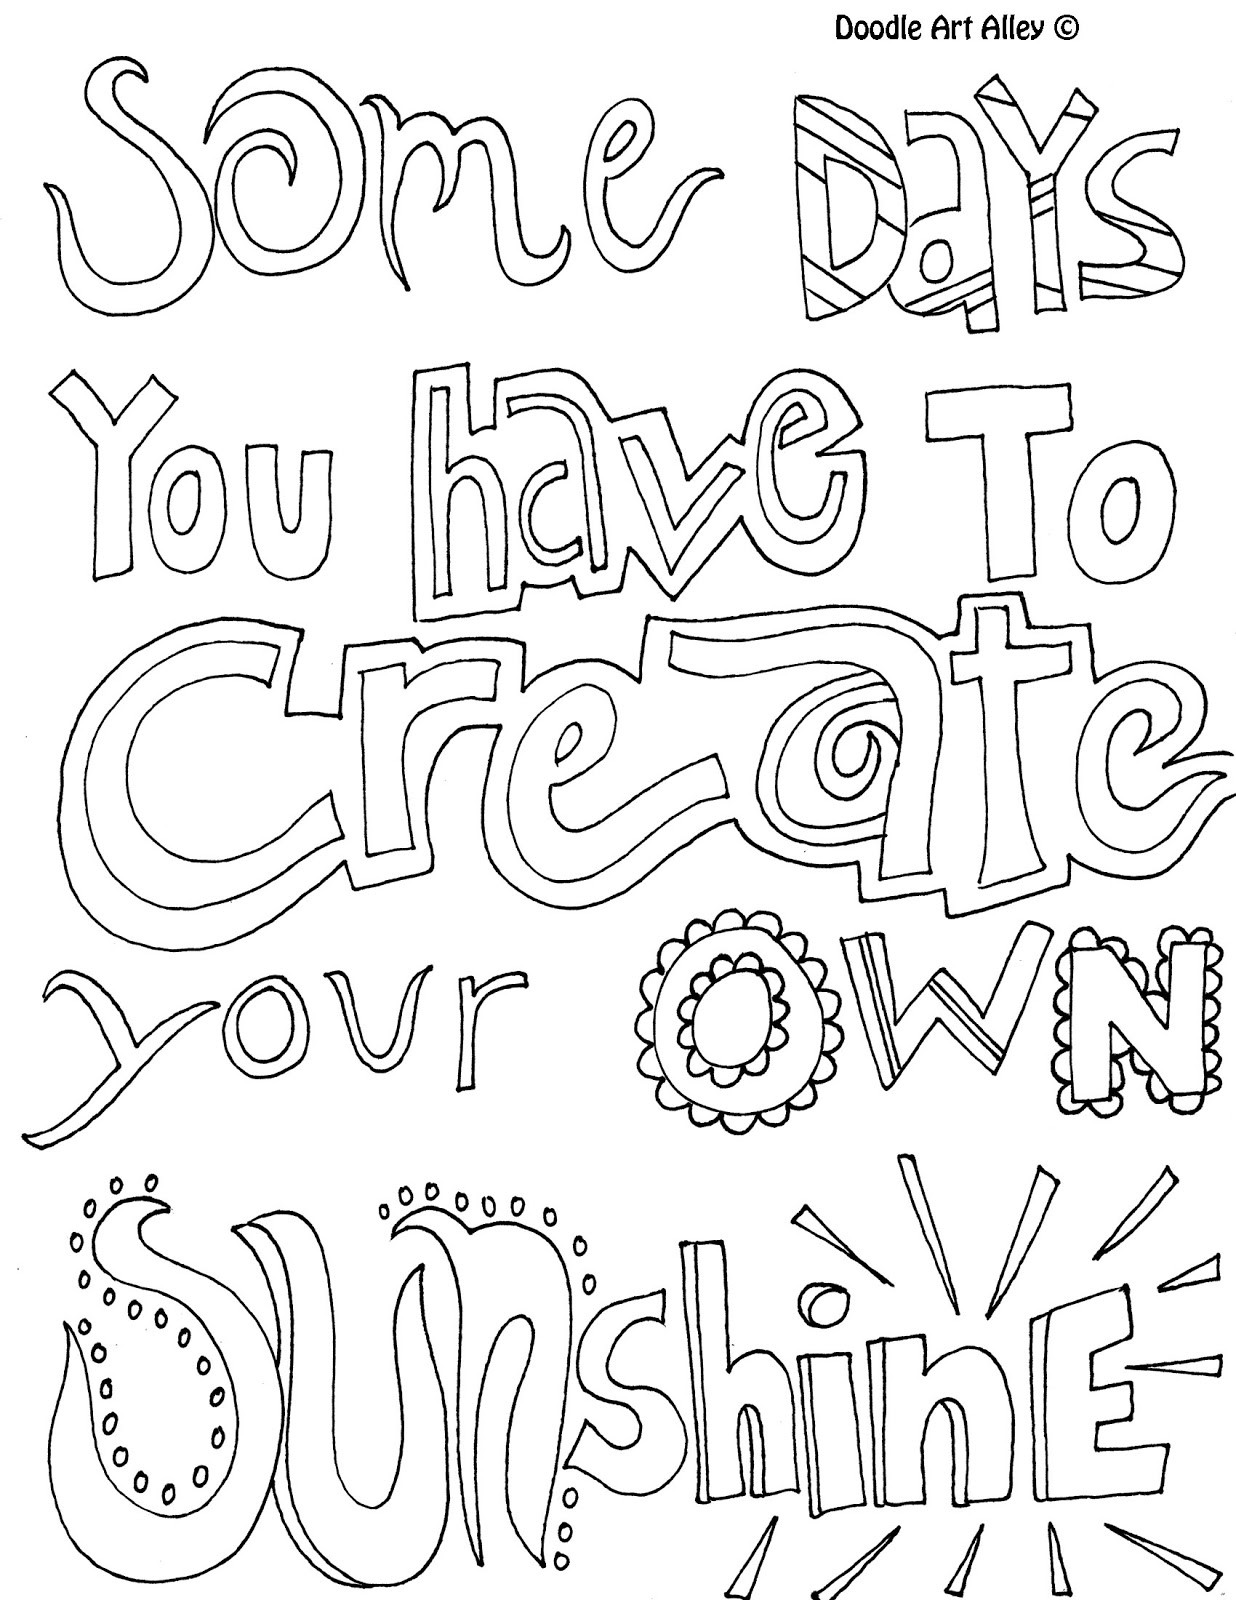 Printable Inspirational Quotes Coloring Pages
 Positive Quotes Coloring Pages QuotesGram